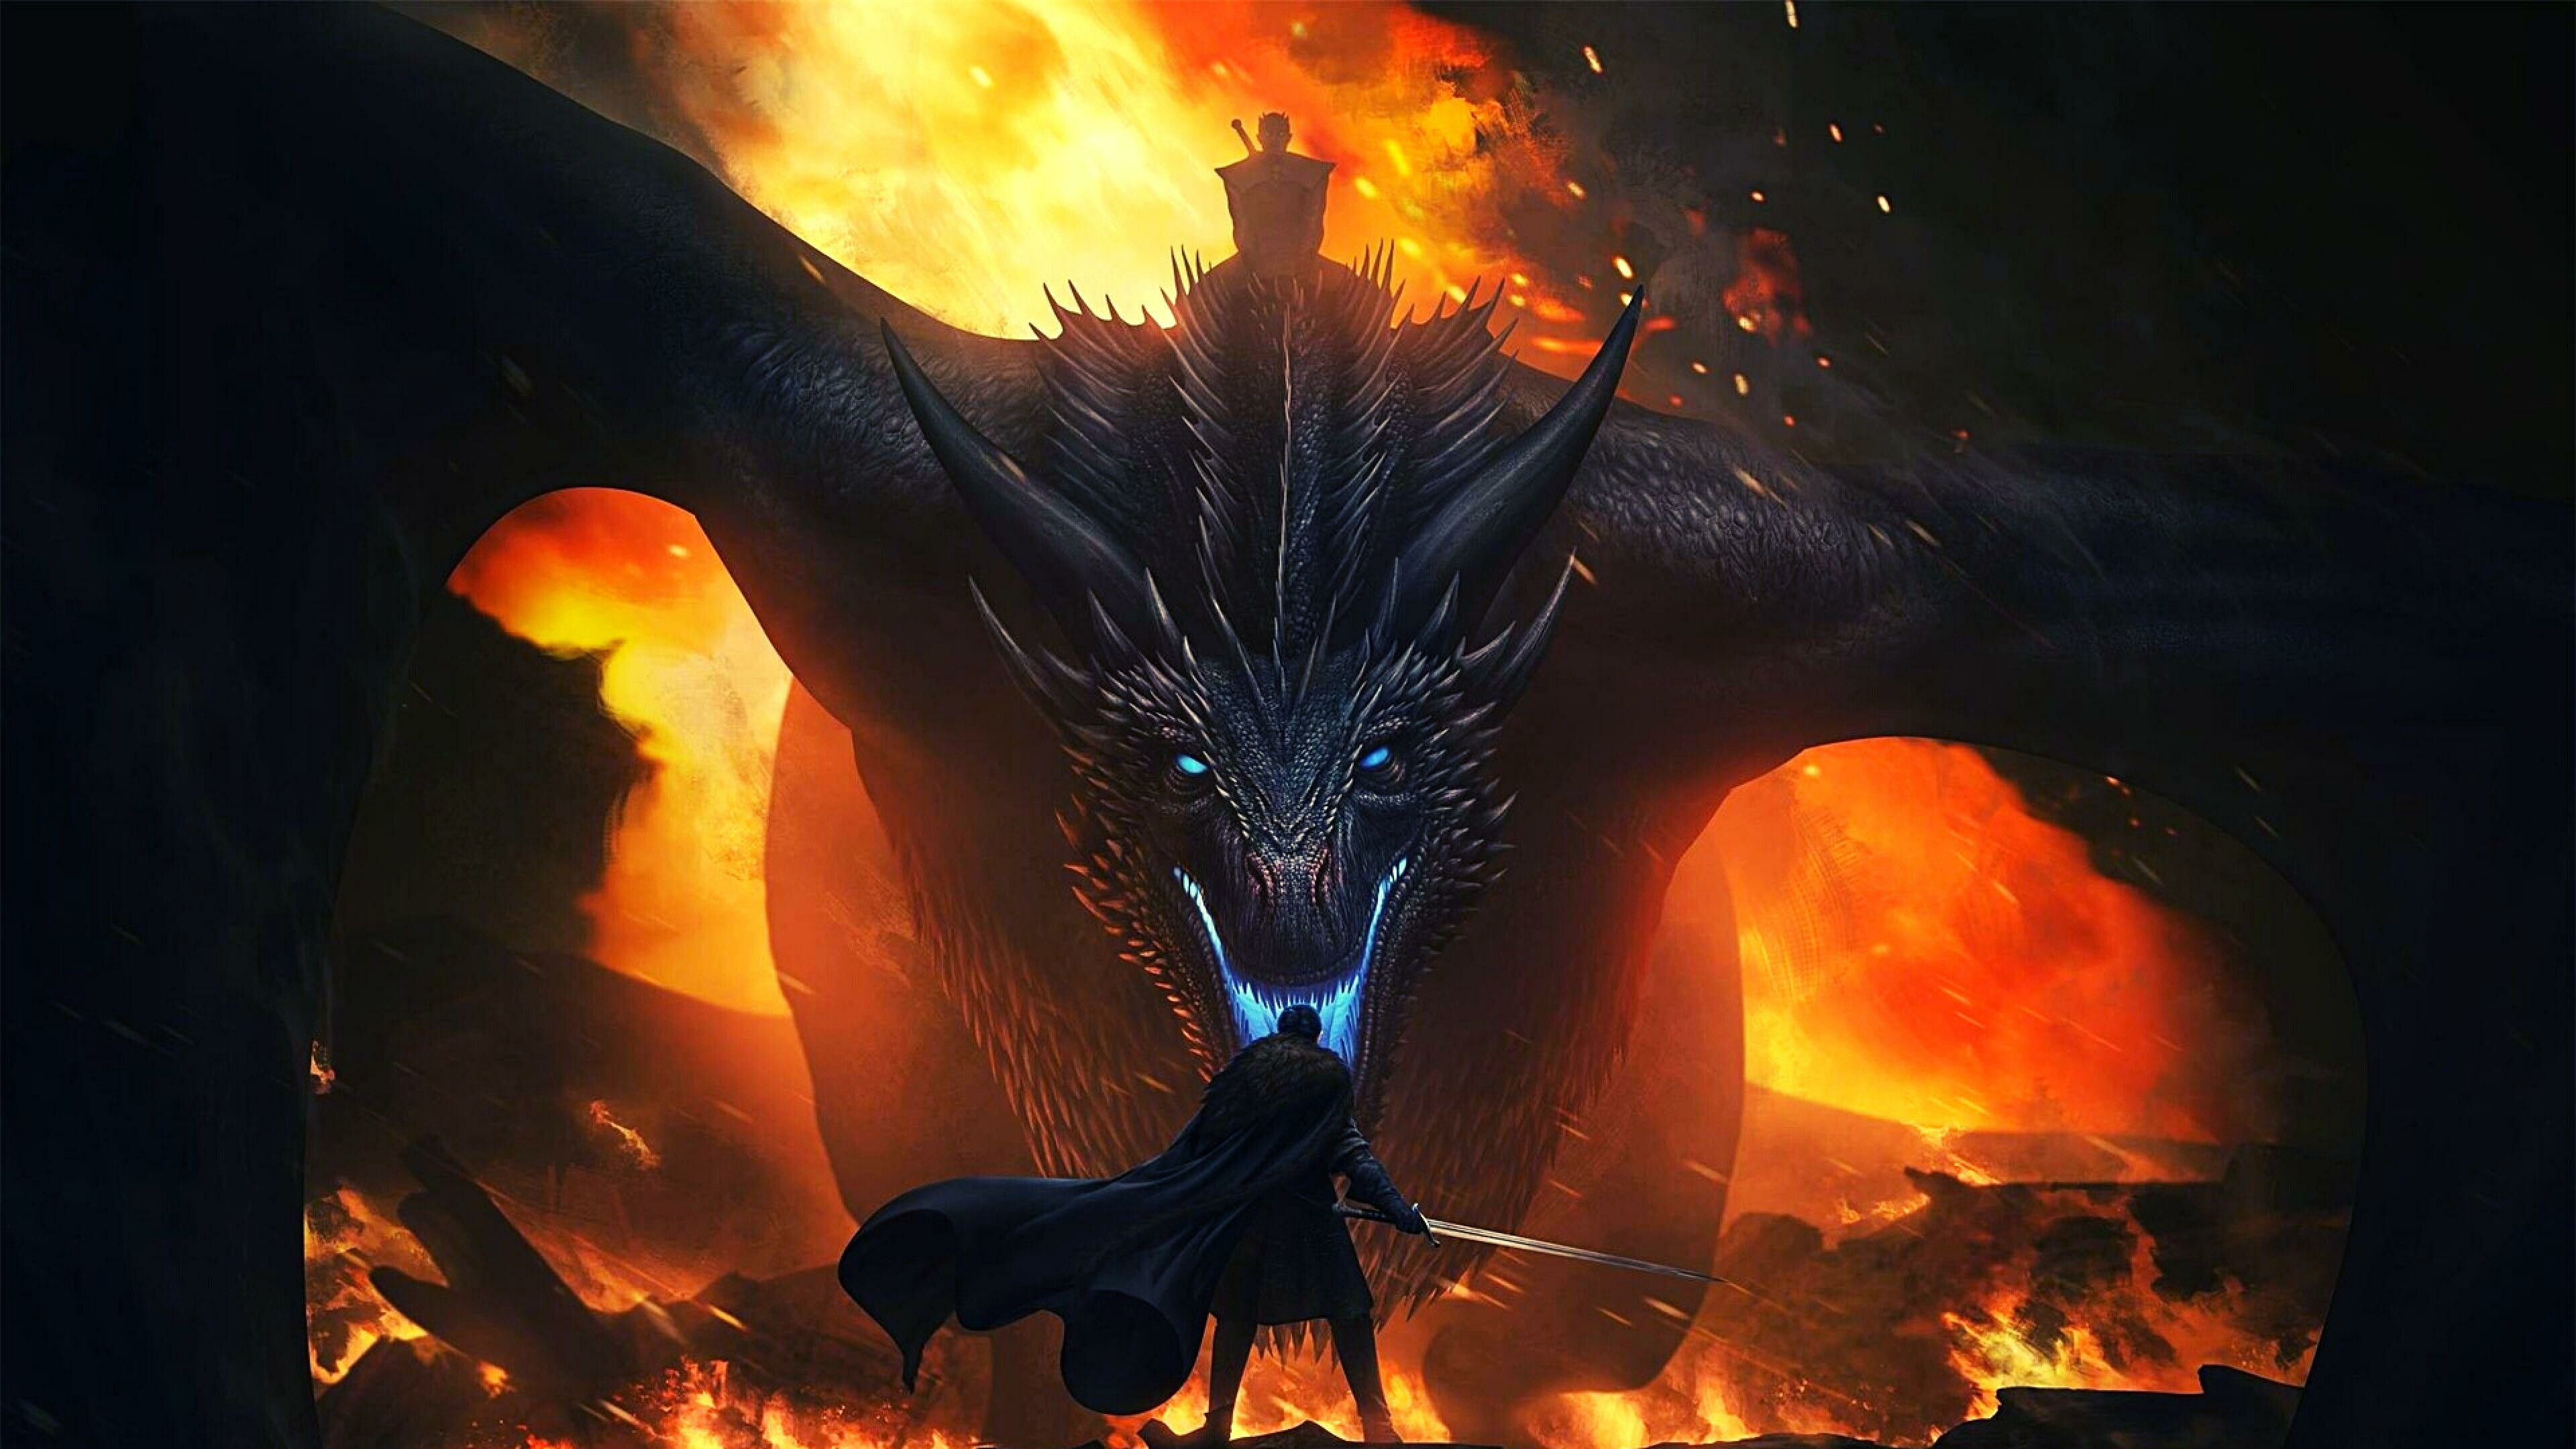 Dragon: Viserion, One of the Night King's most valuable assets in the Battle of Winterfell. 3840x2160 4K Background.